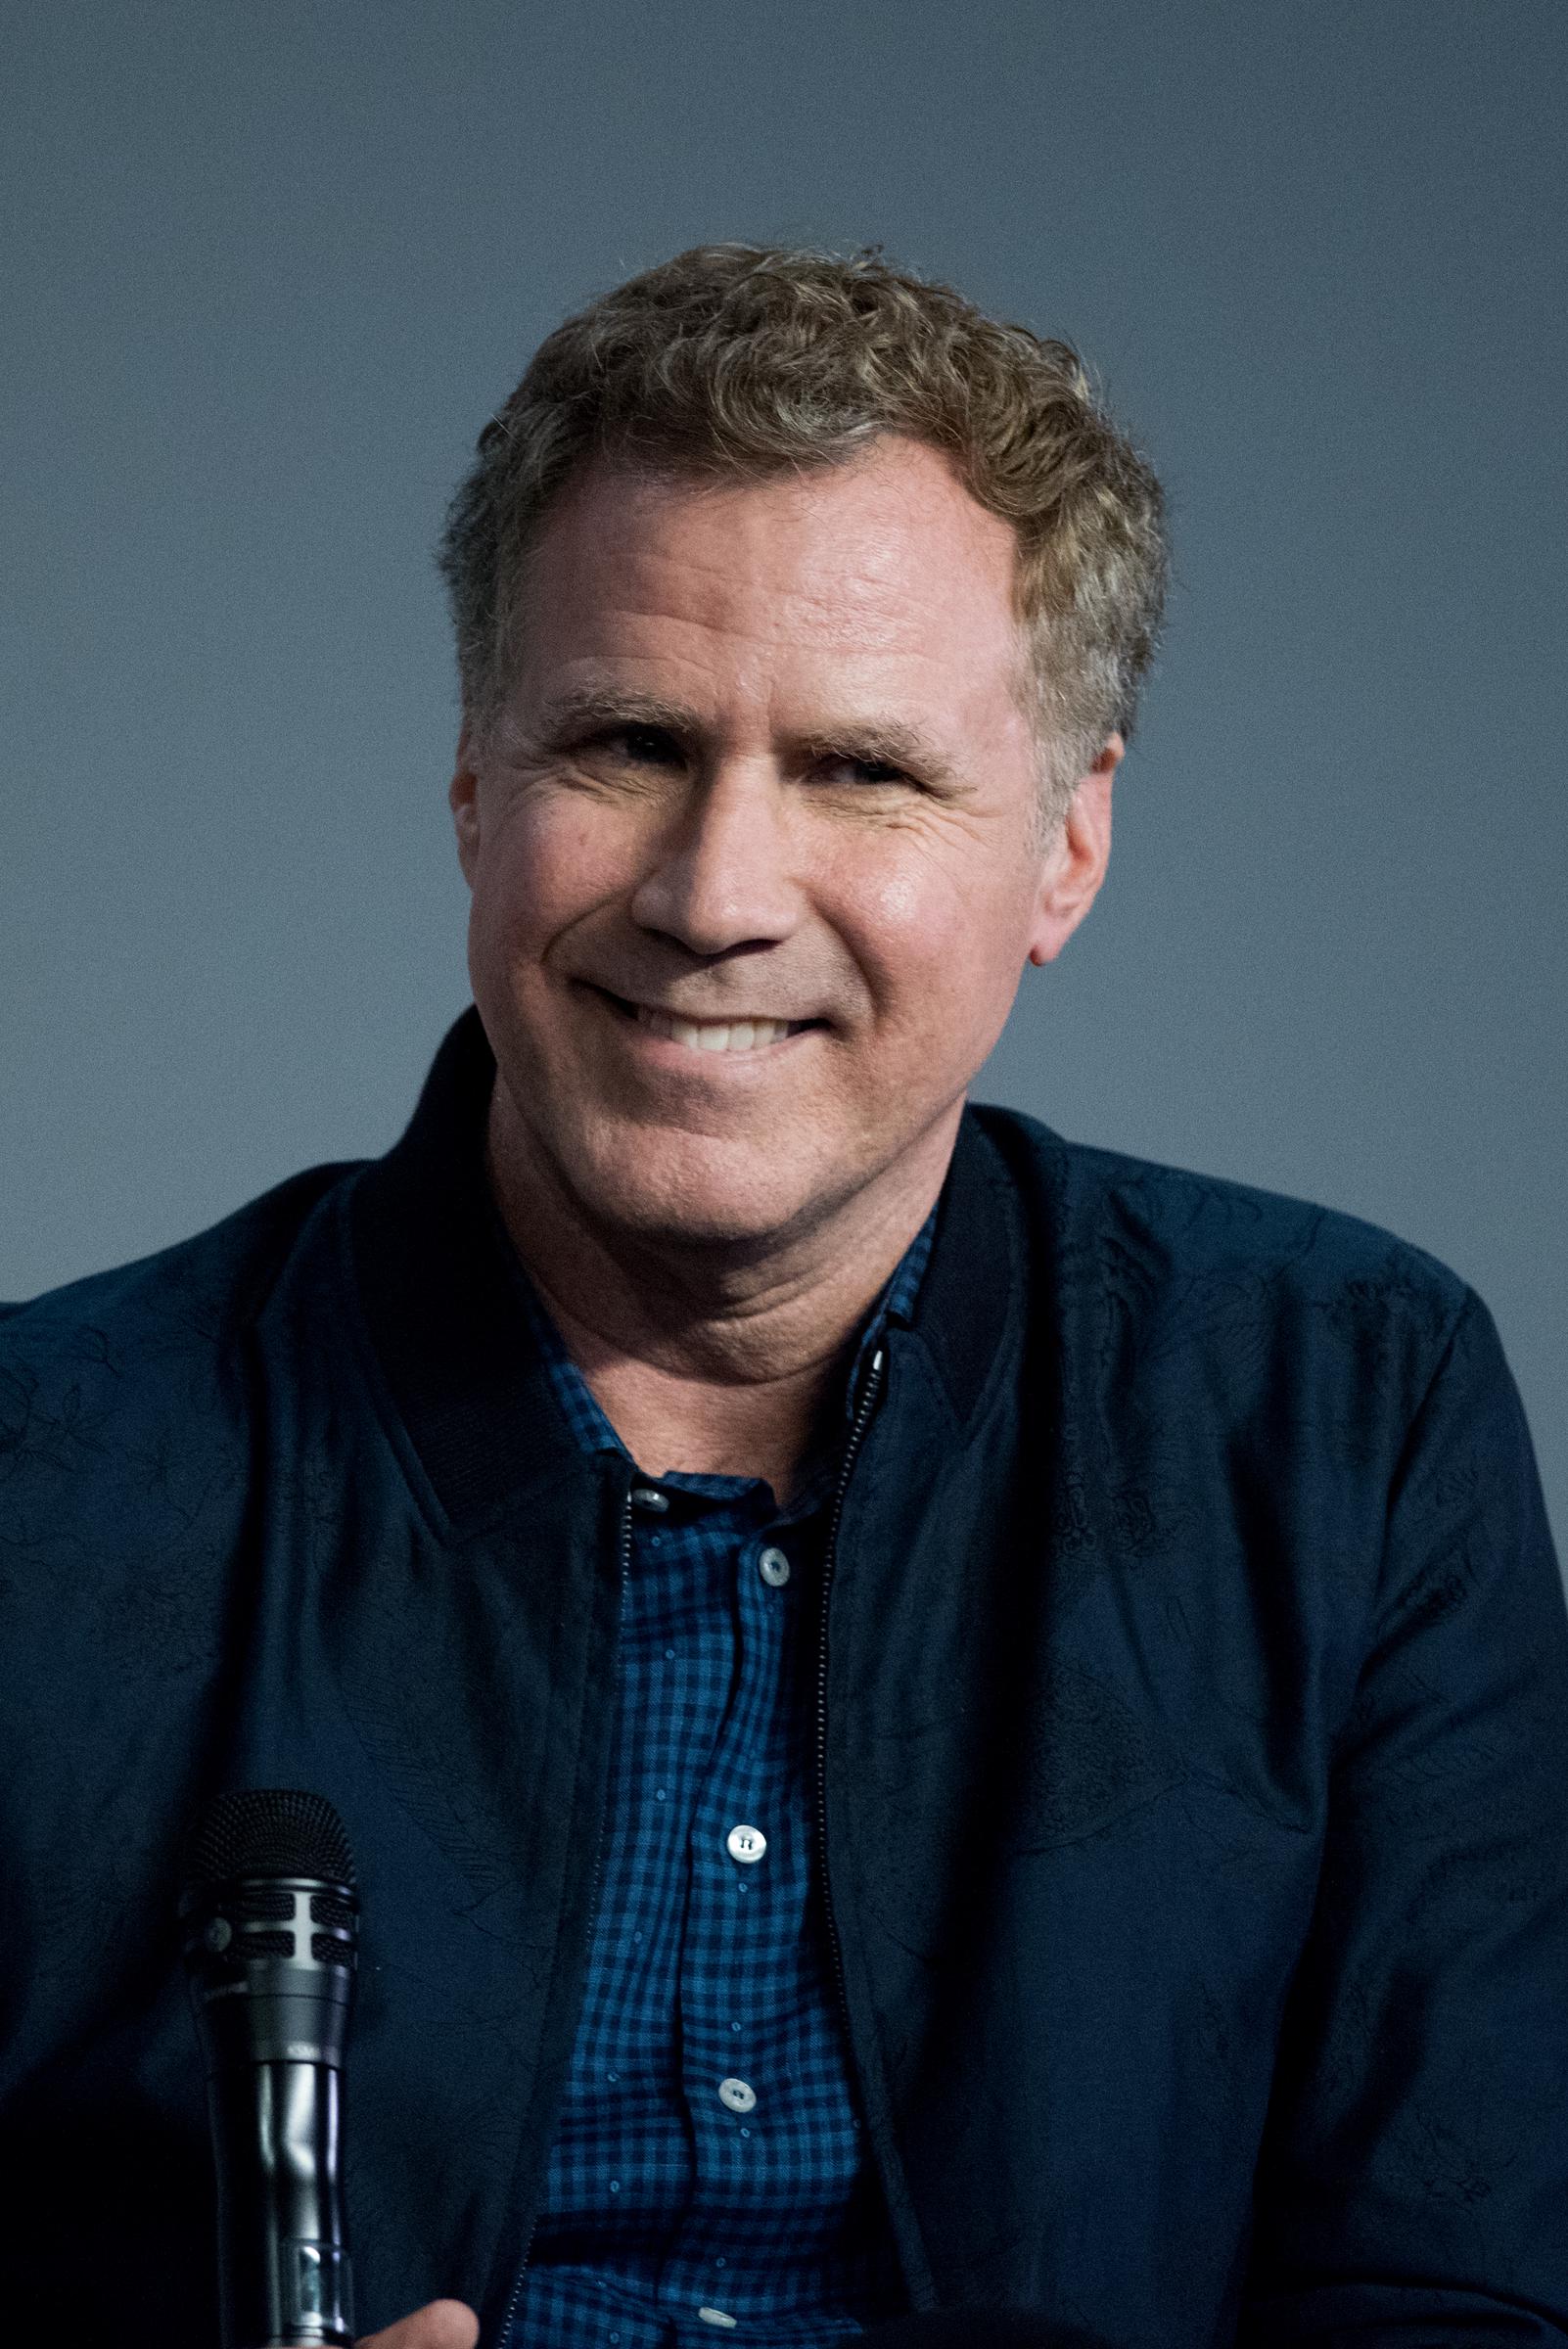 Will Ferrell speaks about his new film "The House" in New York City, on June 21, 2017. | Source: Getty Images